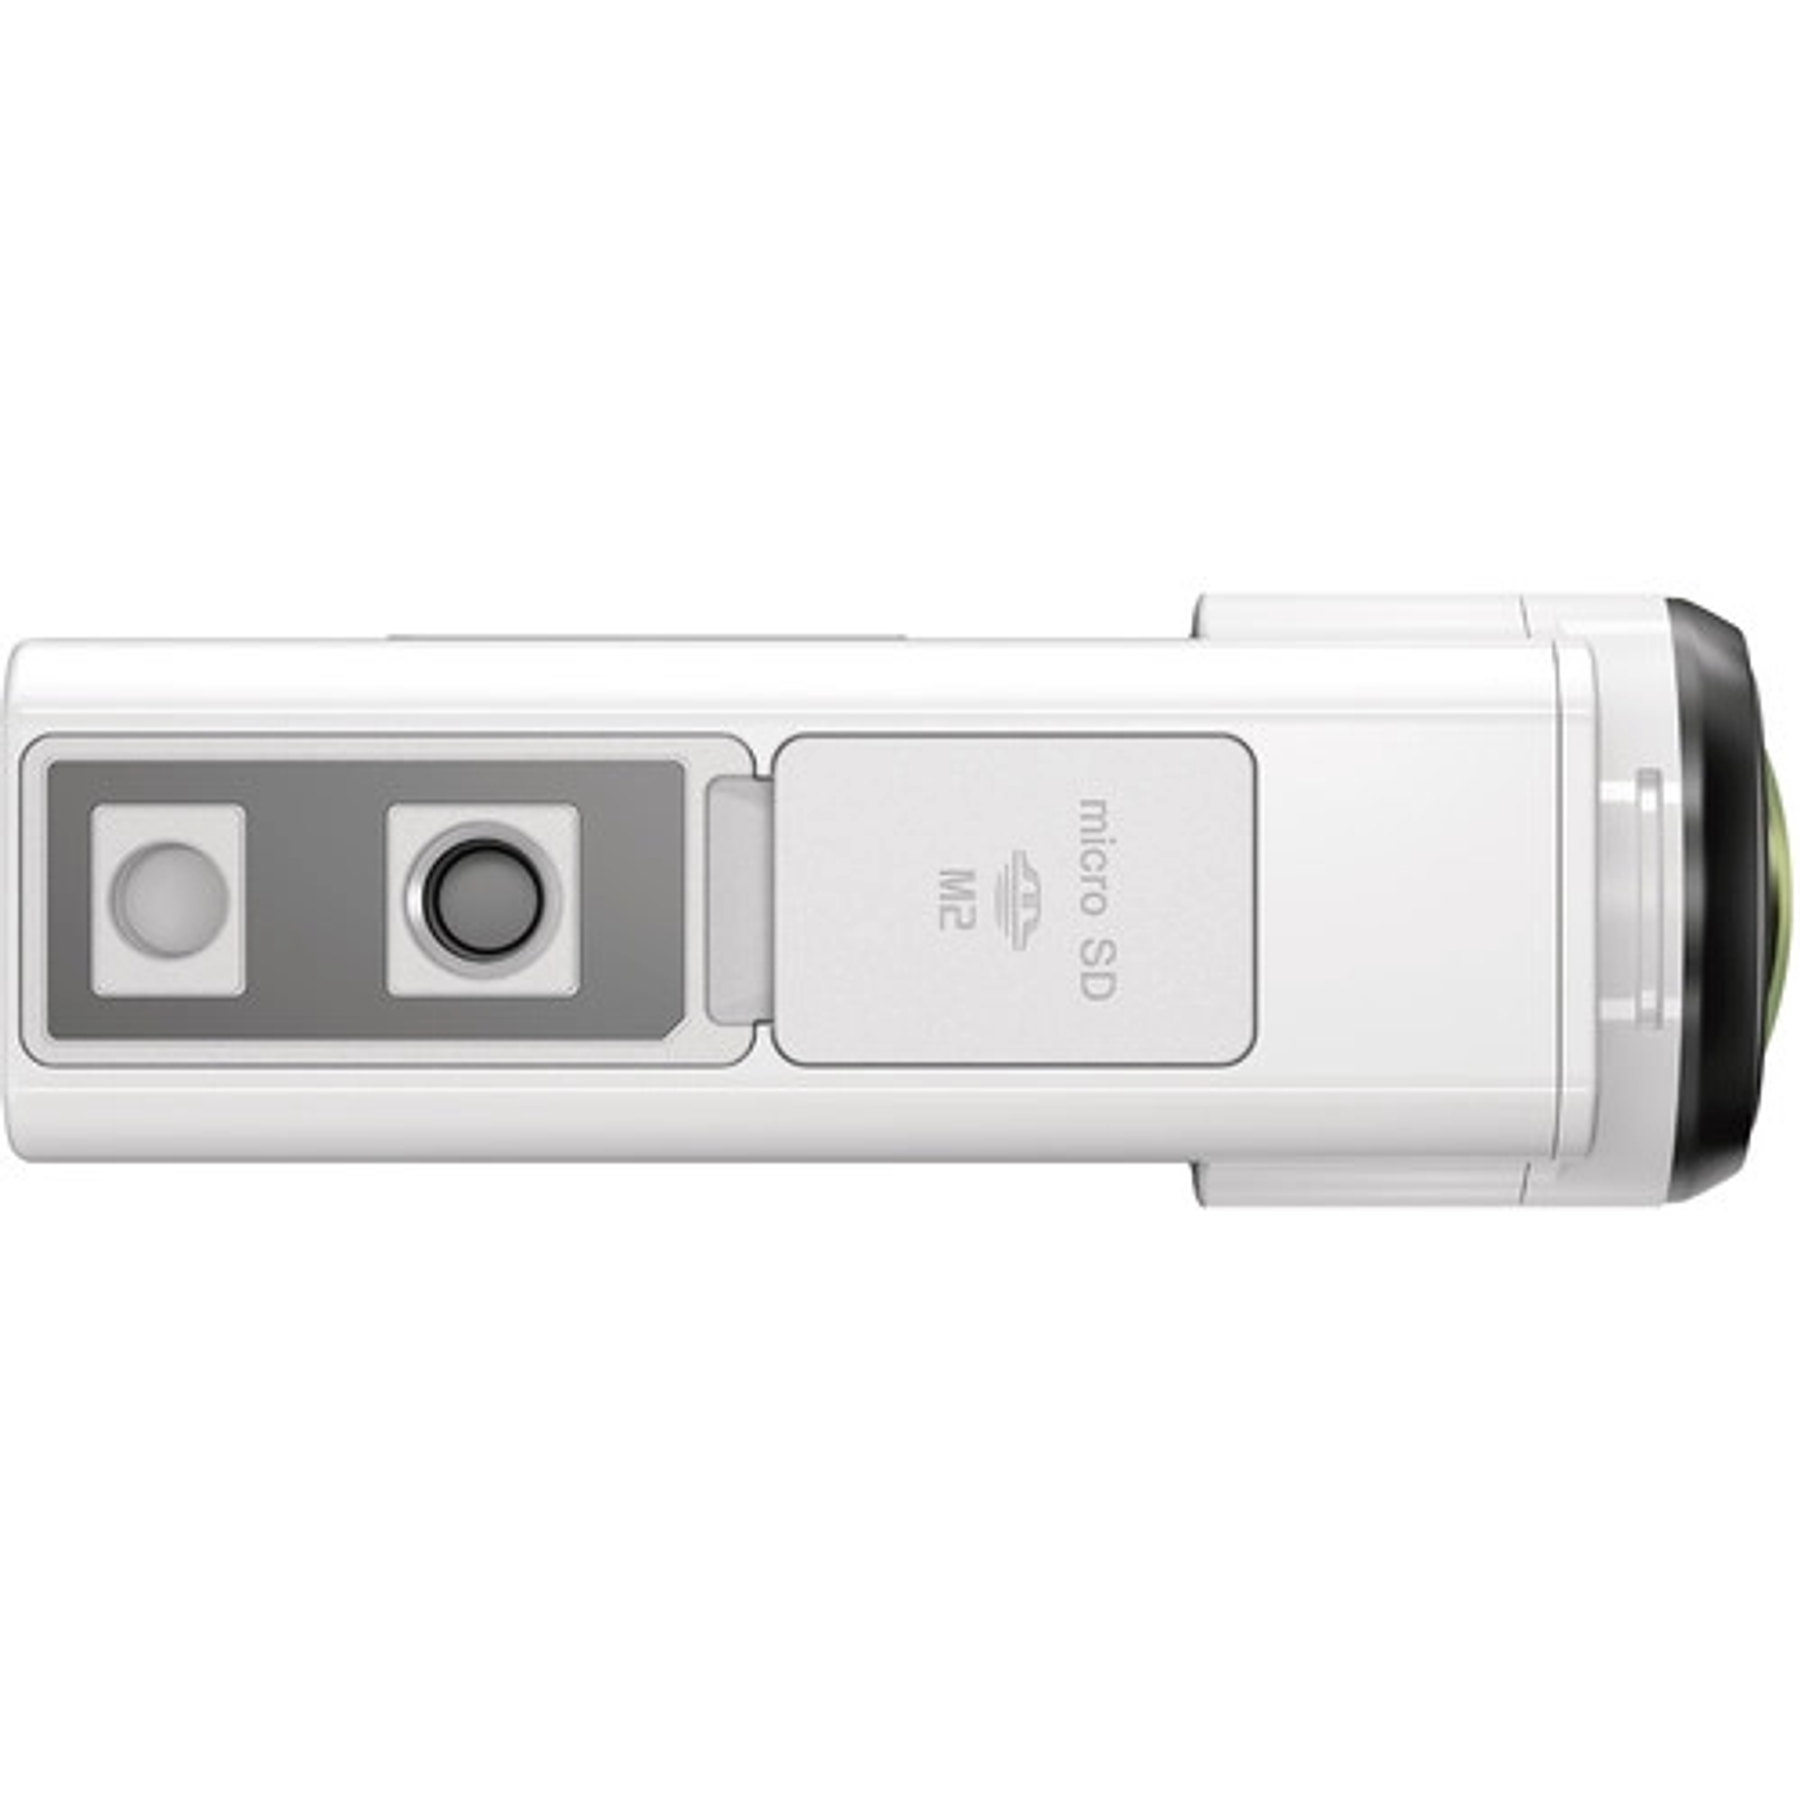 Action Cam HDR-AS300 con Wi-Fi